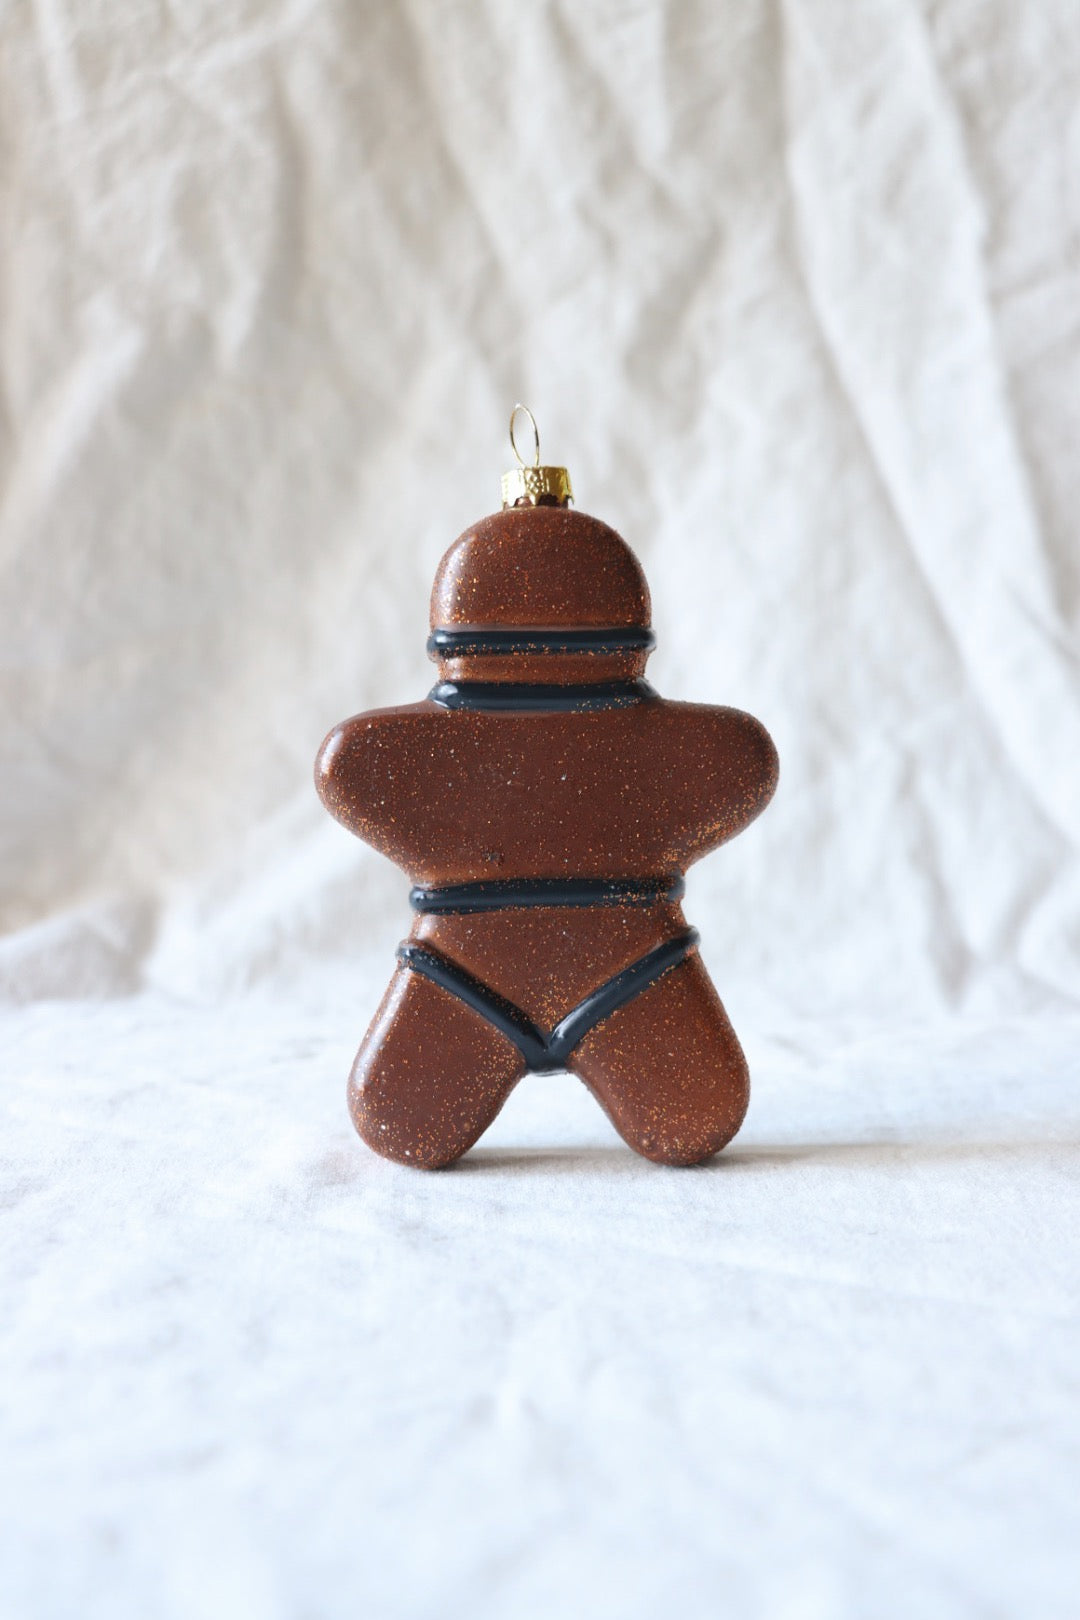 Dirty Gingerbread Gift Set